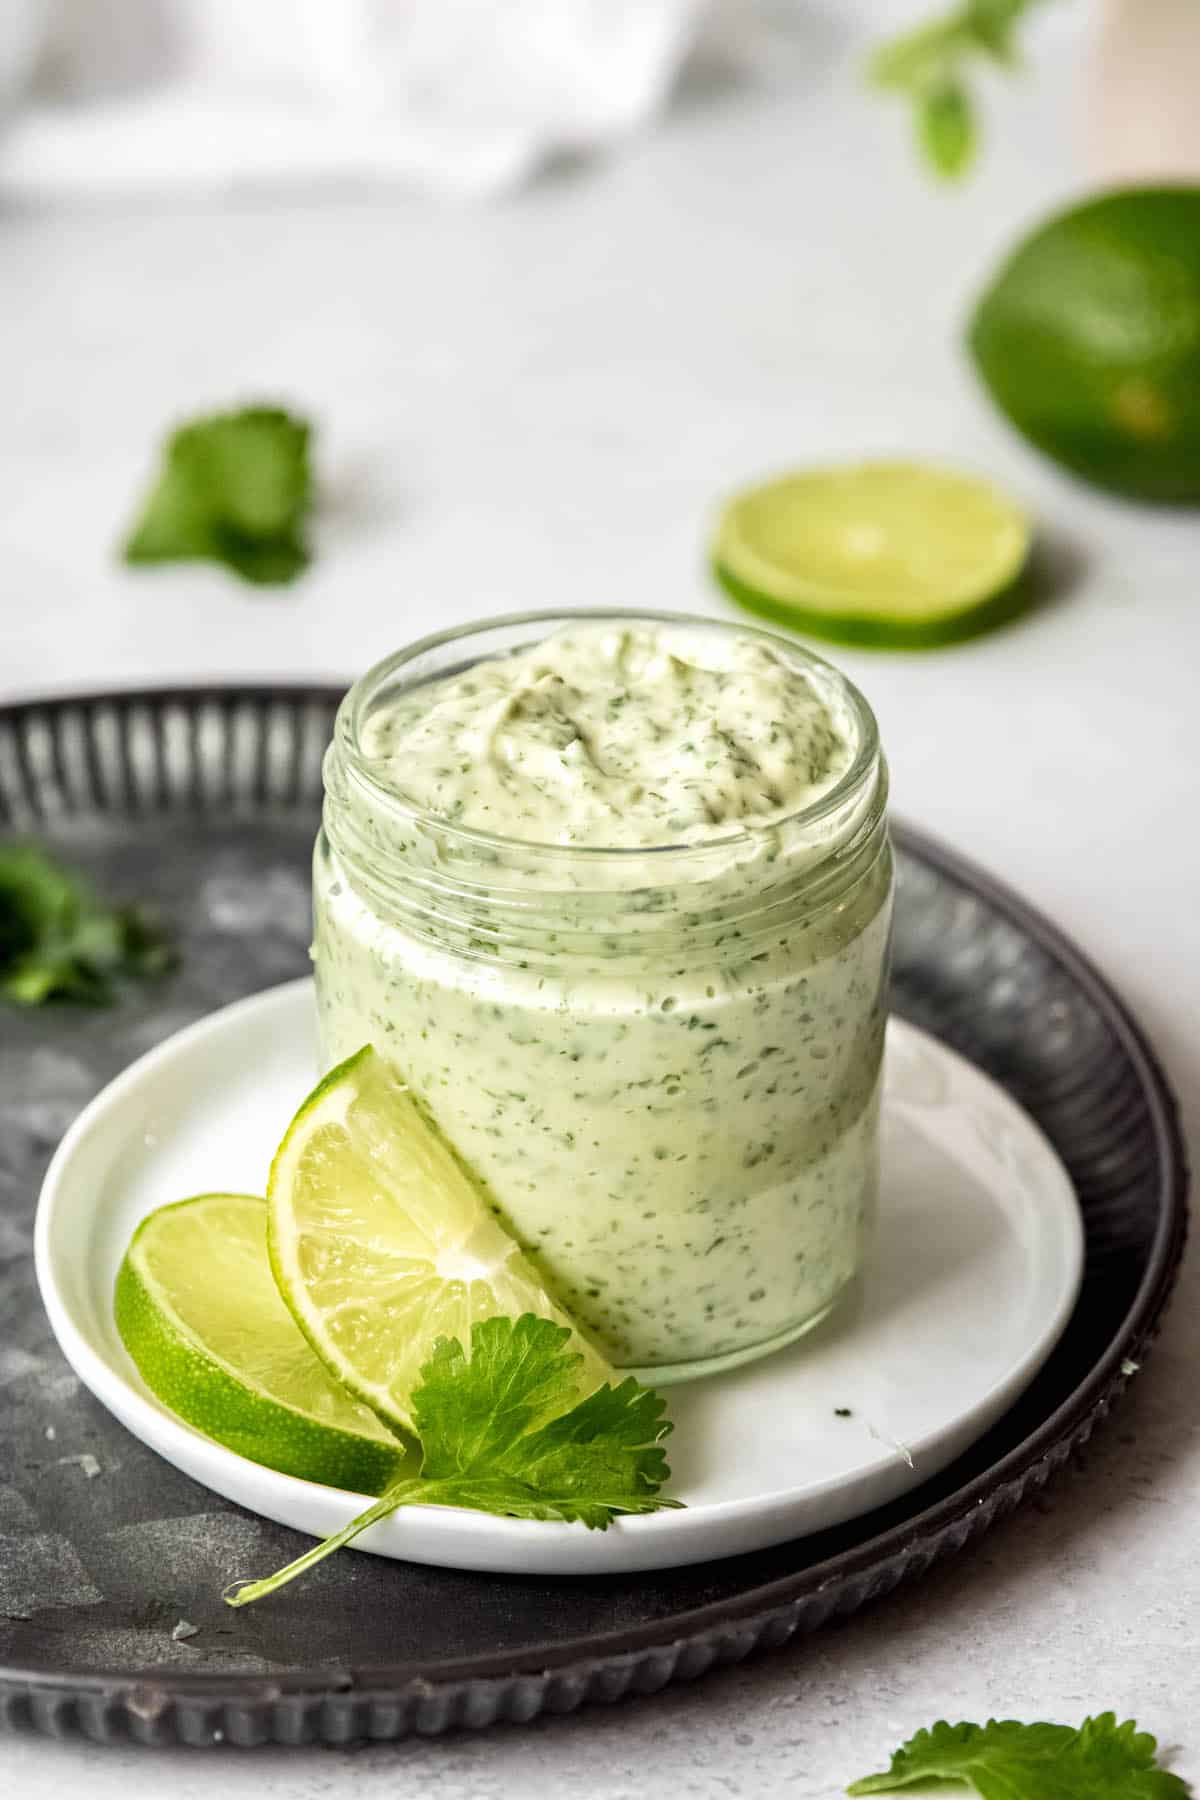 hero shot of a jar of pollo tropical style cilantro lime sauce with jalapenos and garlic on a white table with slices of limes and fresh cilantro strewn about.